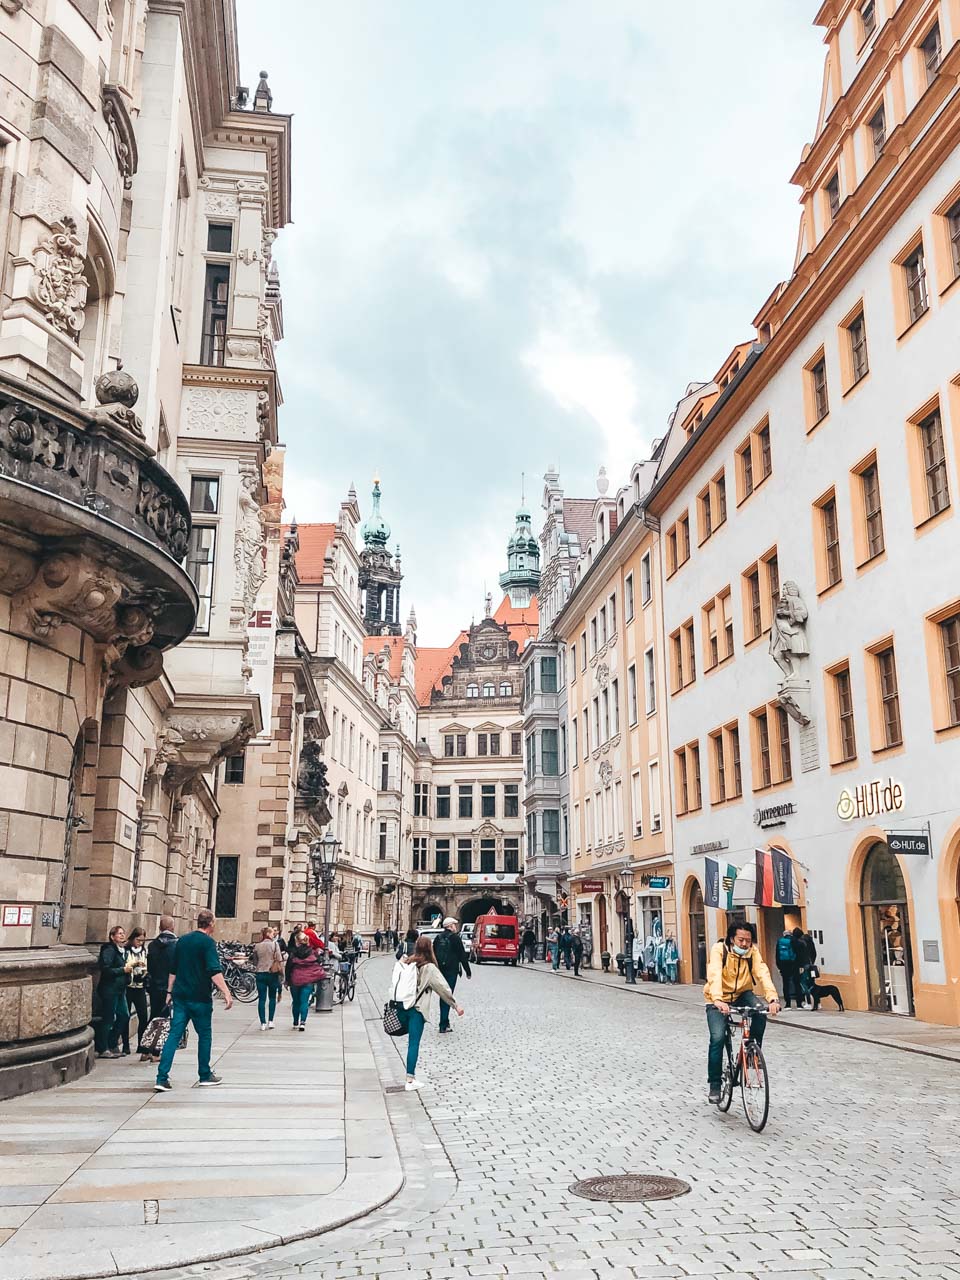 People walking down the street in Dresden's Old Town area